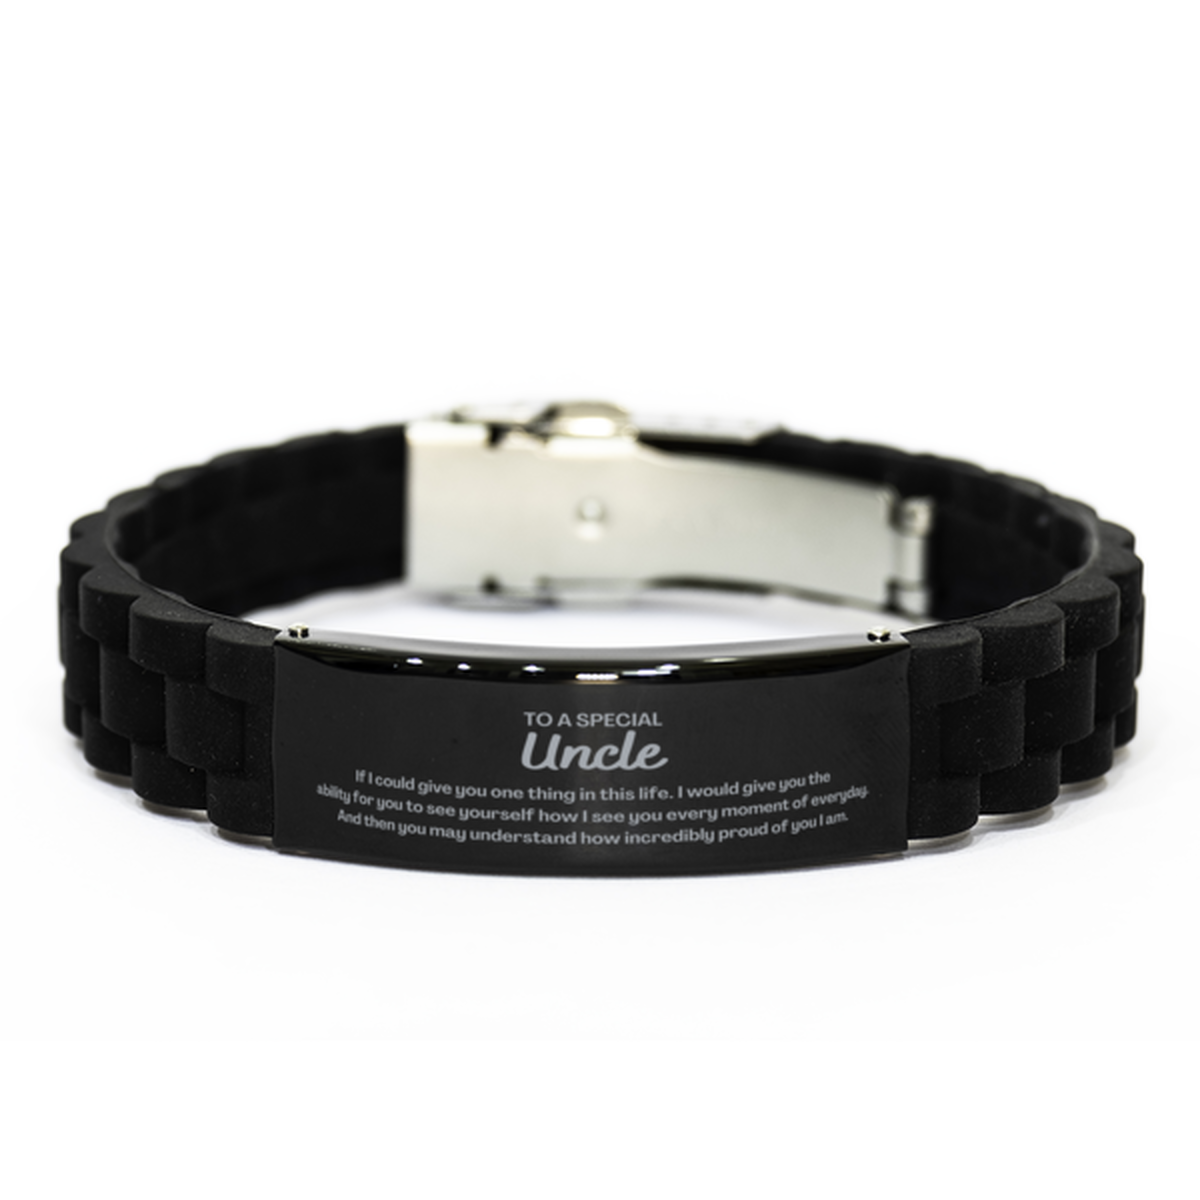 To My Uncle Black Glidelock Clasp Bracelet, Gifts For Uncle Engraved, Inspirational Gifts for Christmas Birthday, Epic Gifts for Uncle To A Special Uncle how incredibly proud of you I am